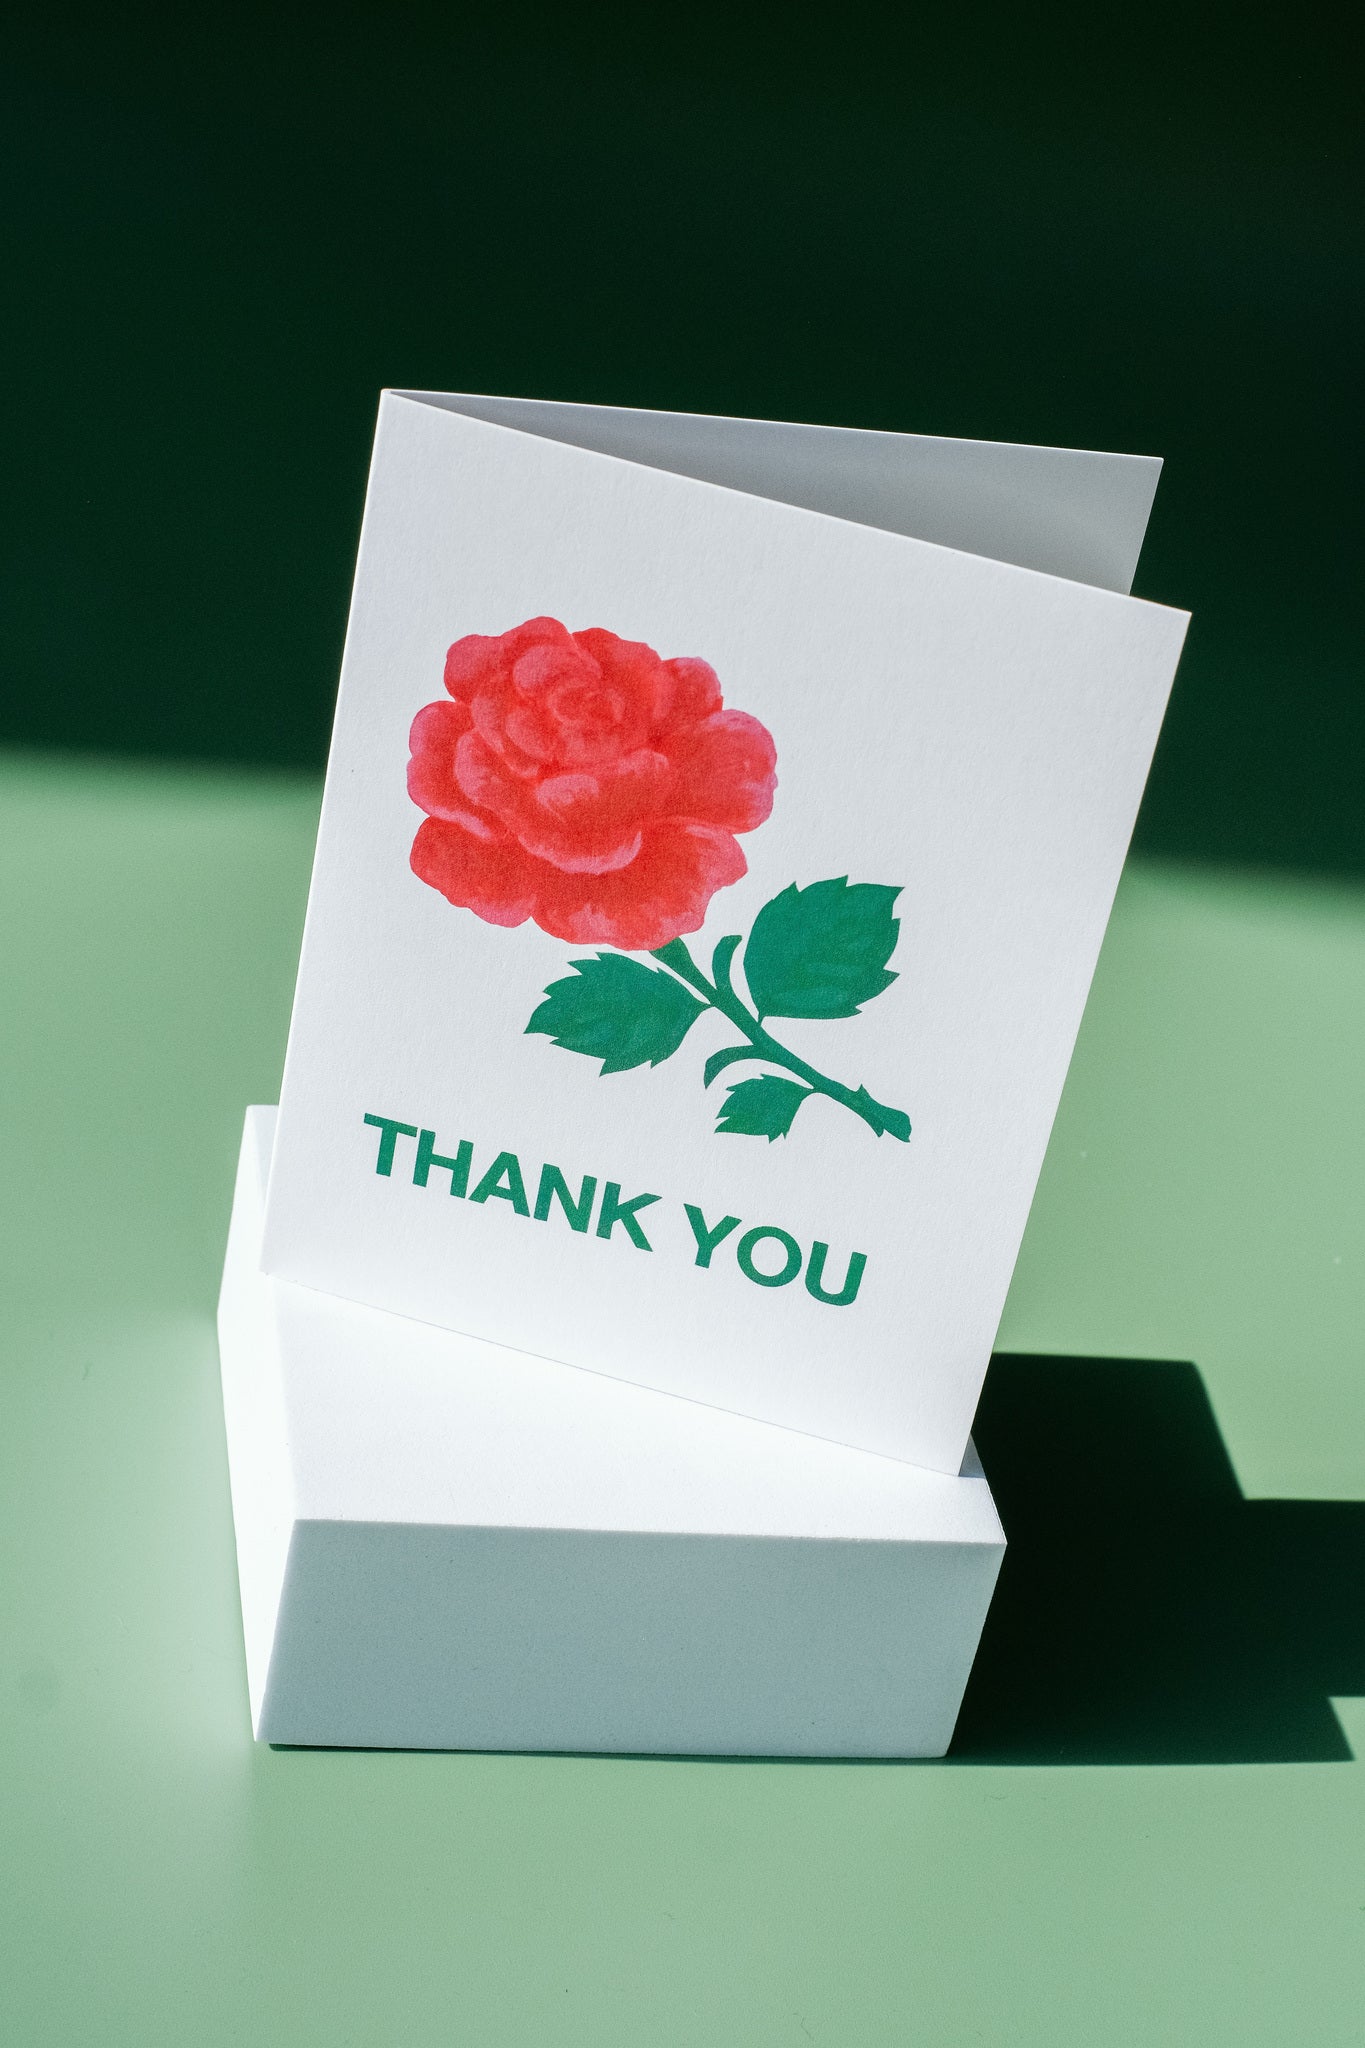 Cream colored background featuring a big red rose with a green stem and leaves, below it is written in green-colored font &quot;Thank You&quot; printed on cardstock on top of a white block with a green background.